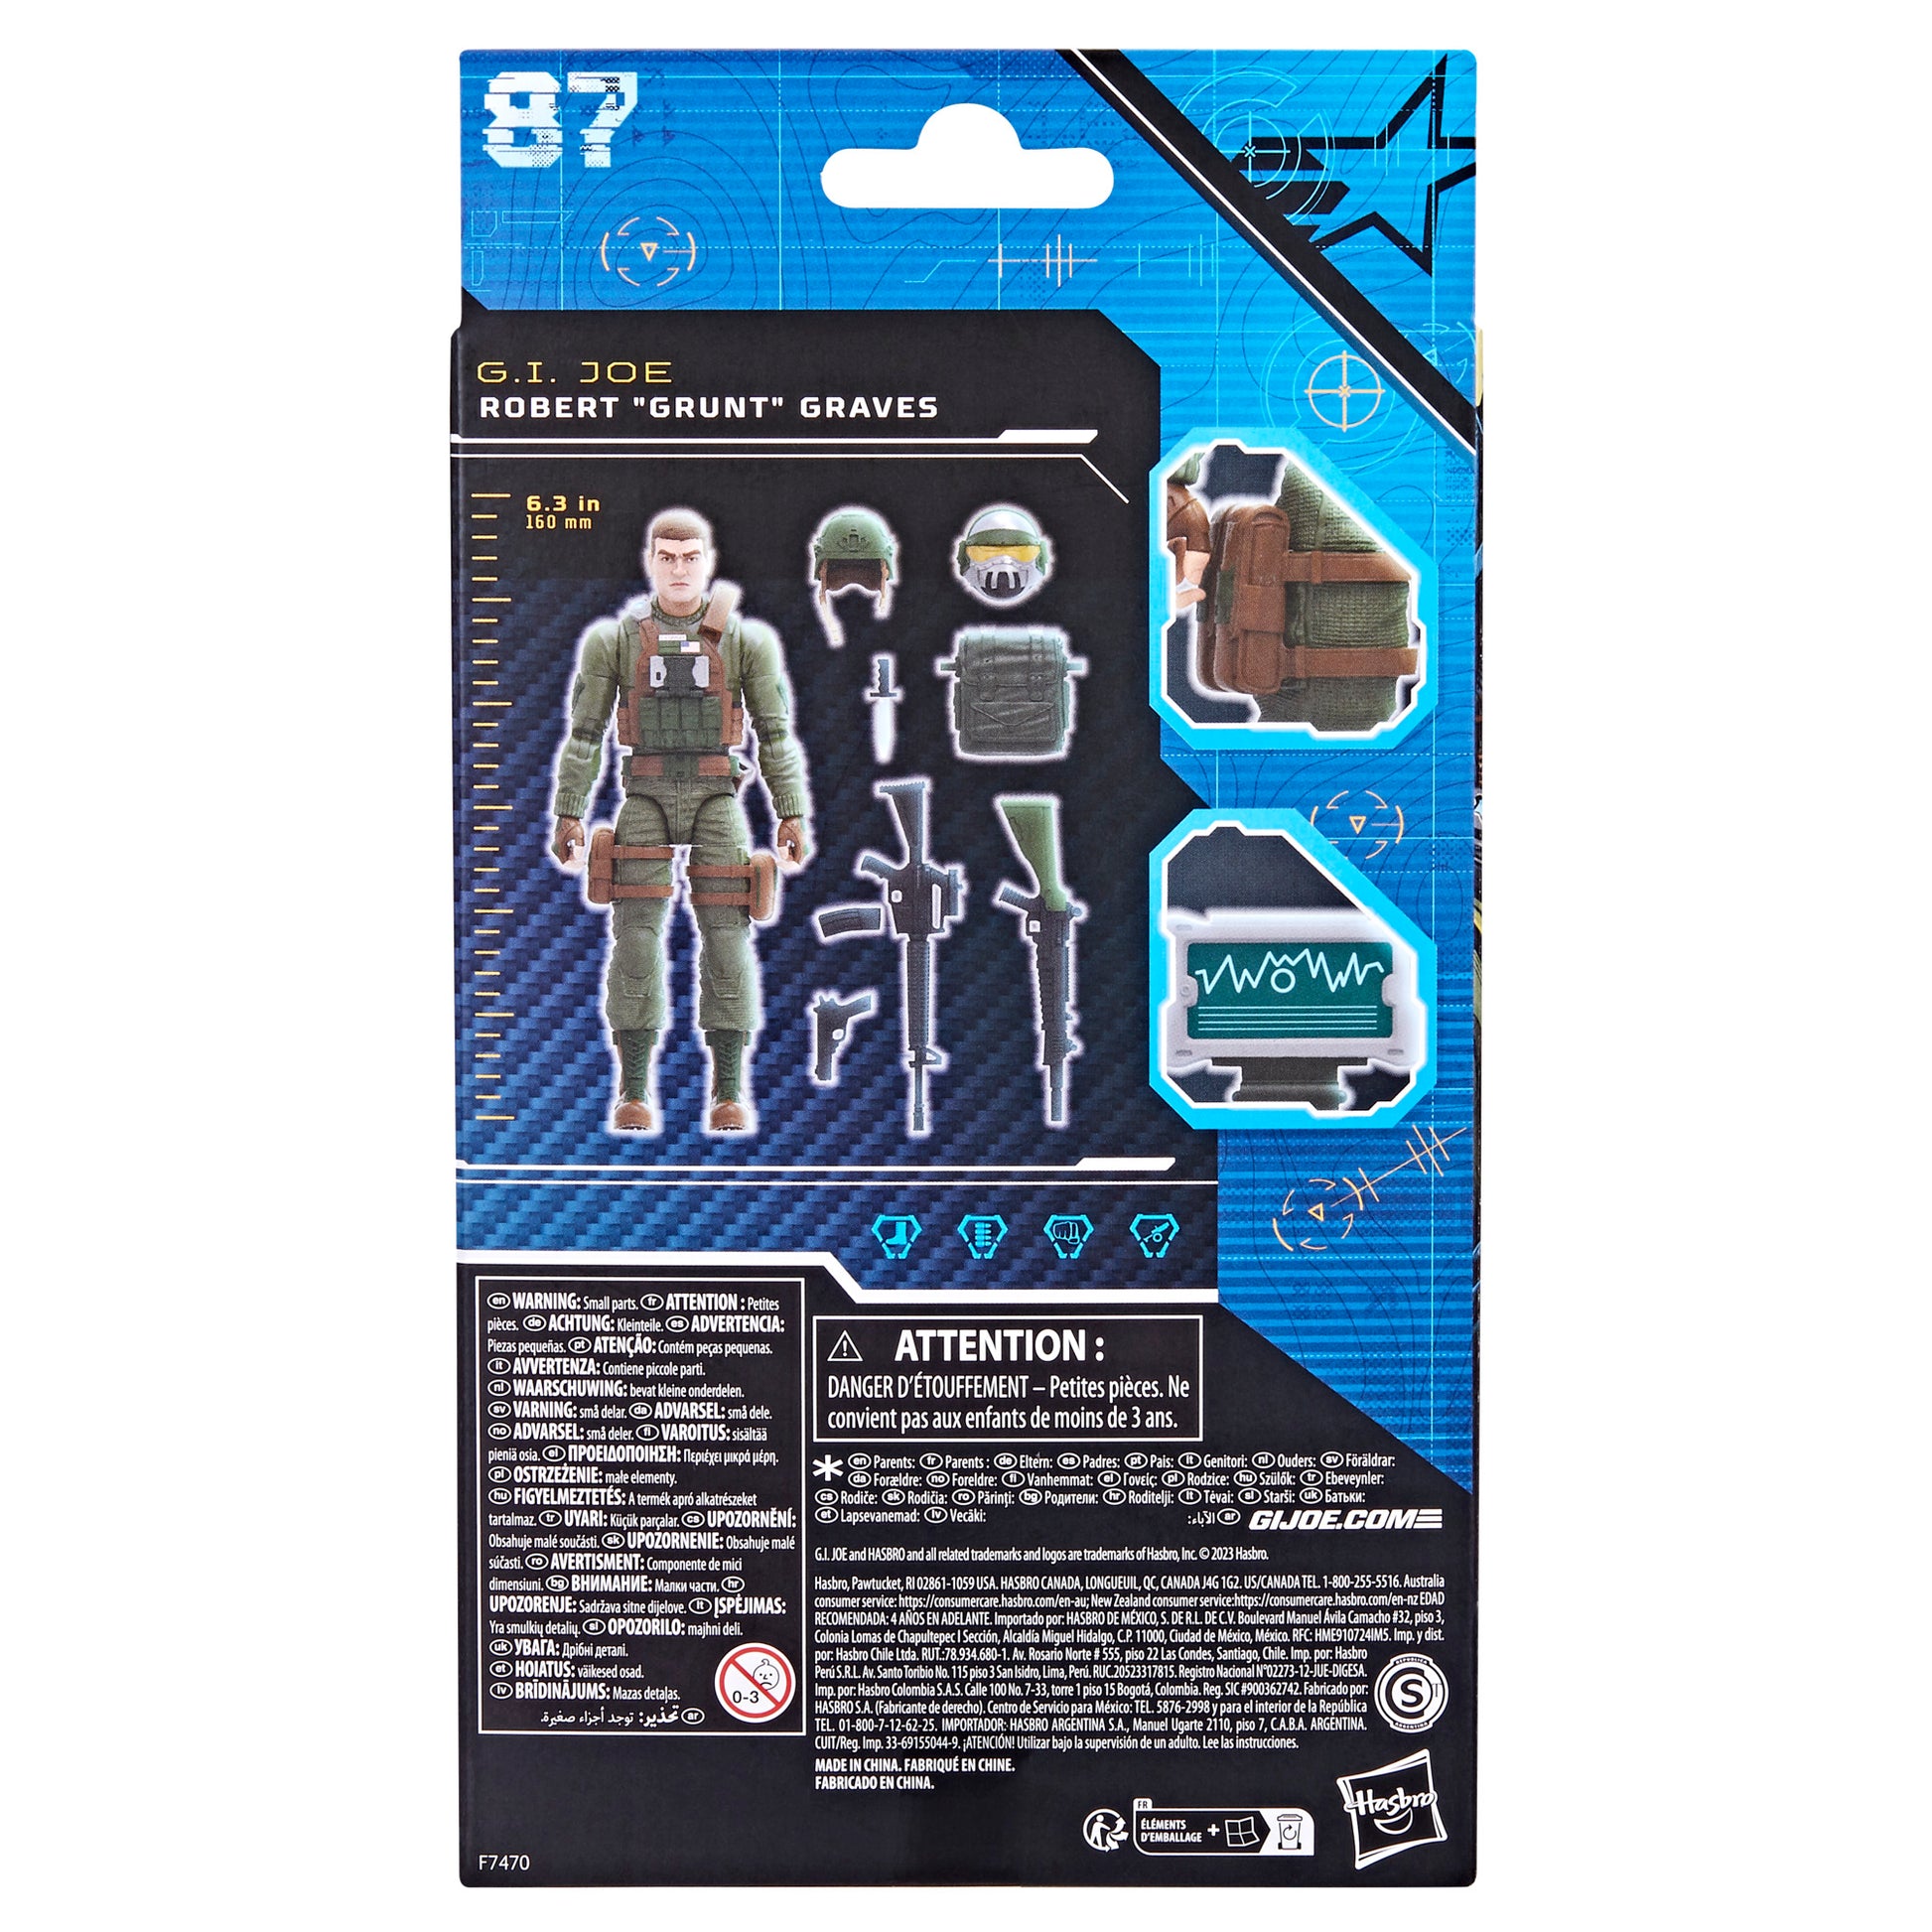 G.I. Joe Classified Series Robert "Grunt" Graves, 87 Action Figure Toy back view - HTSY